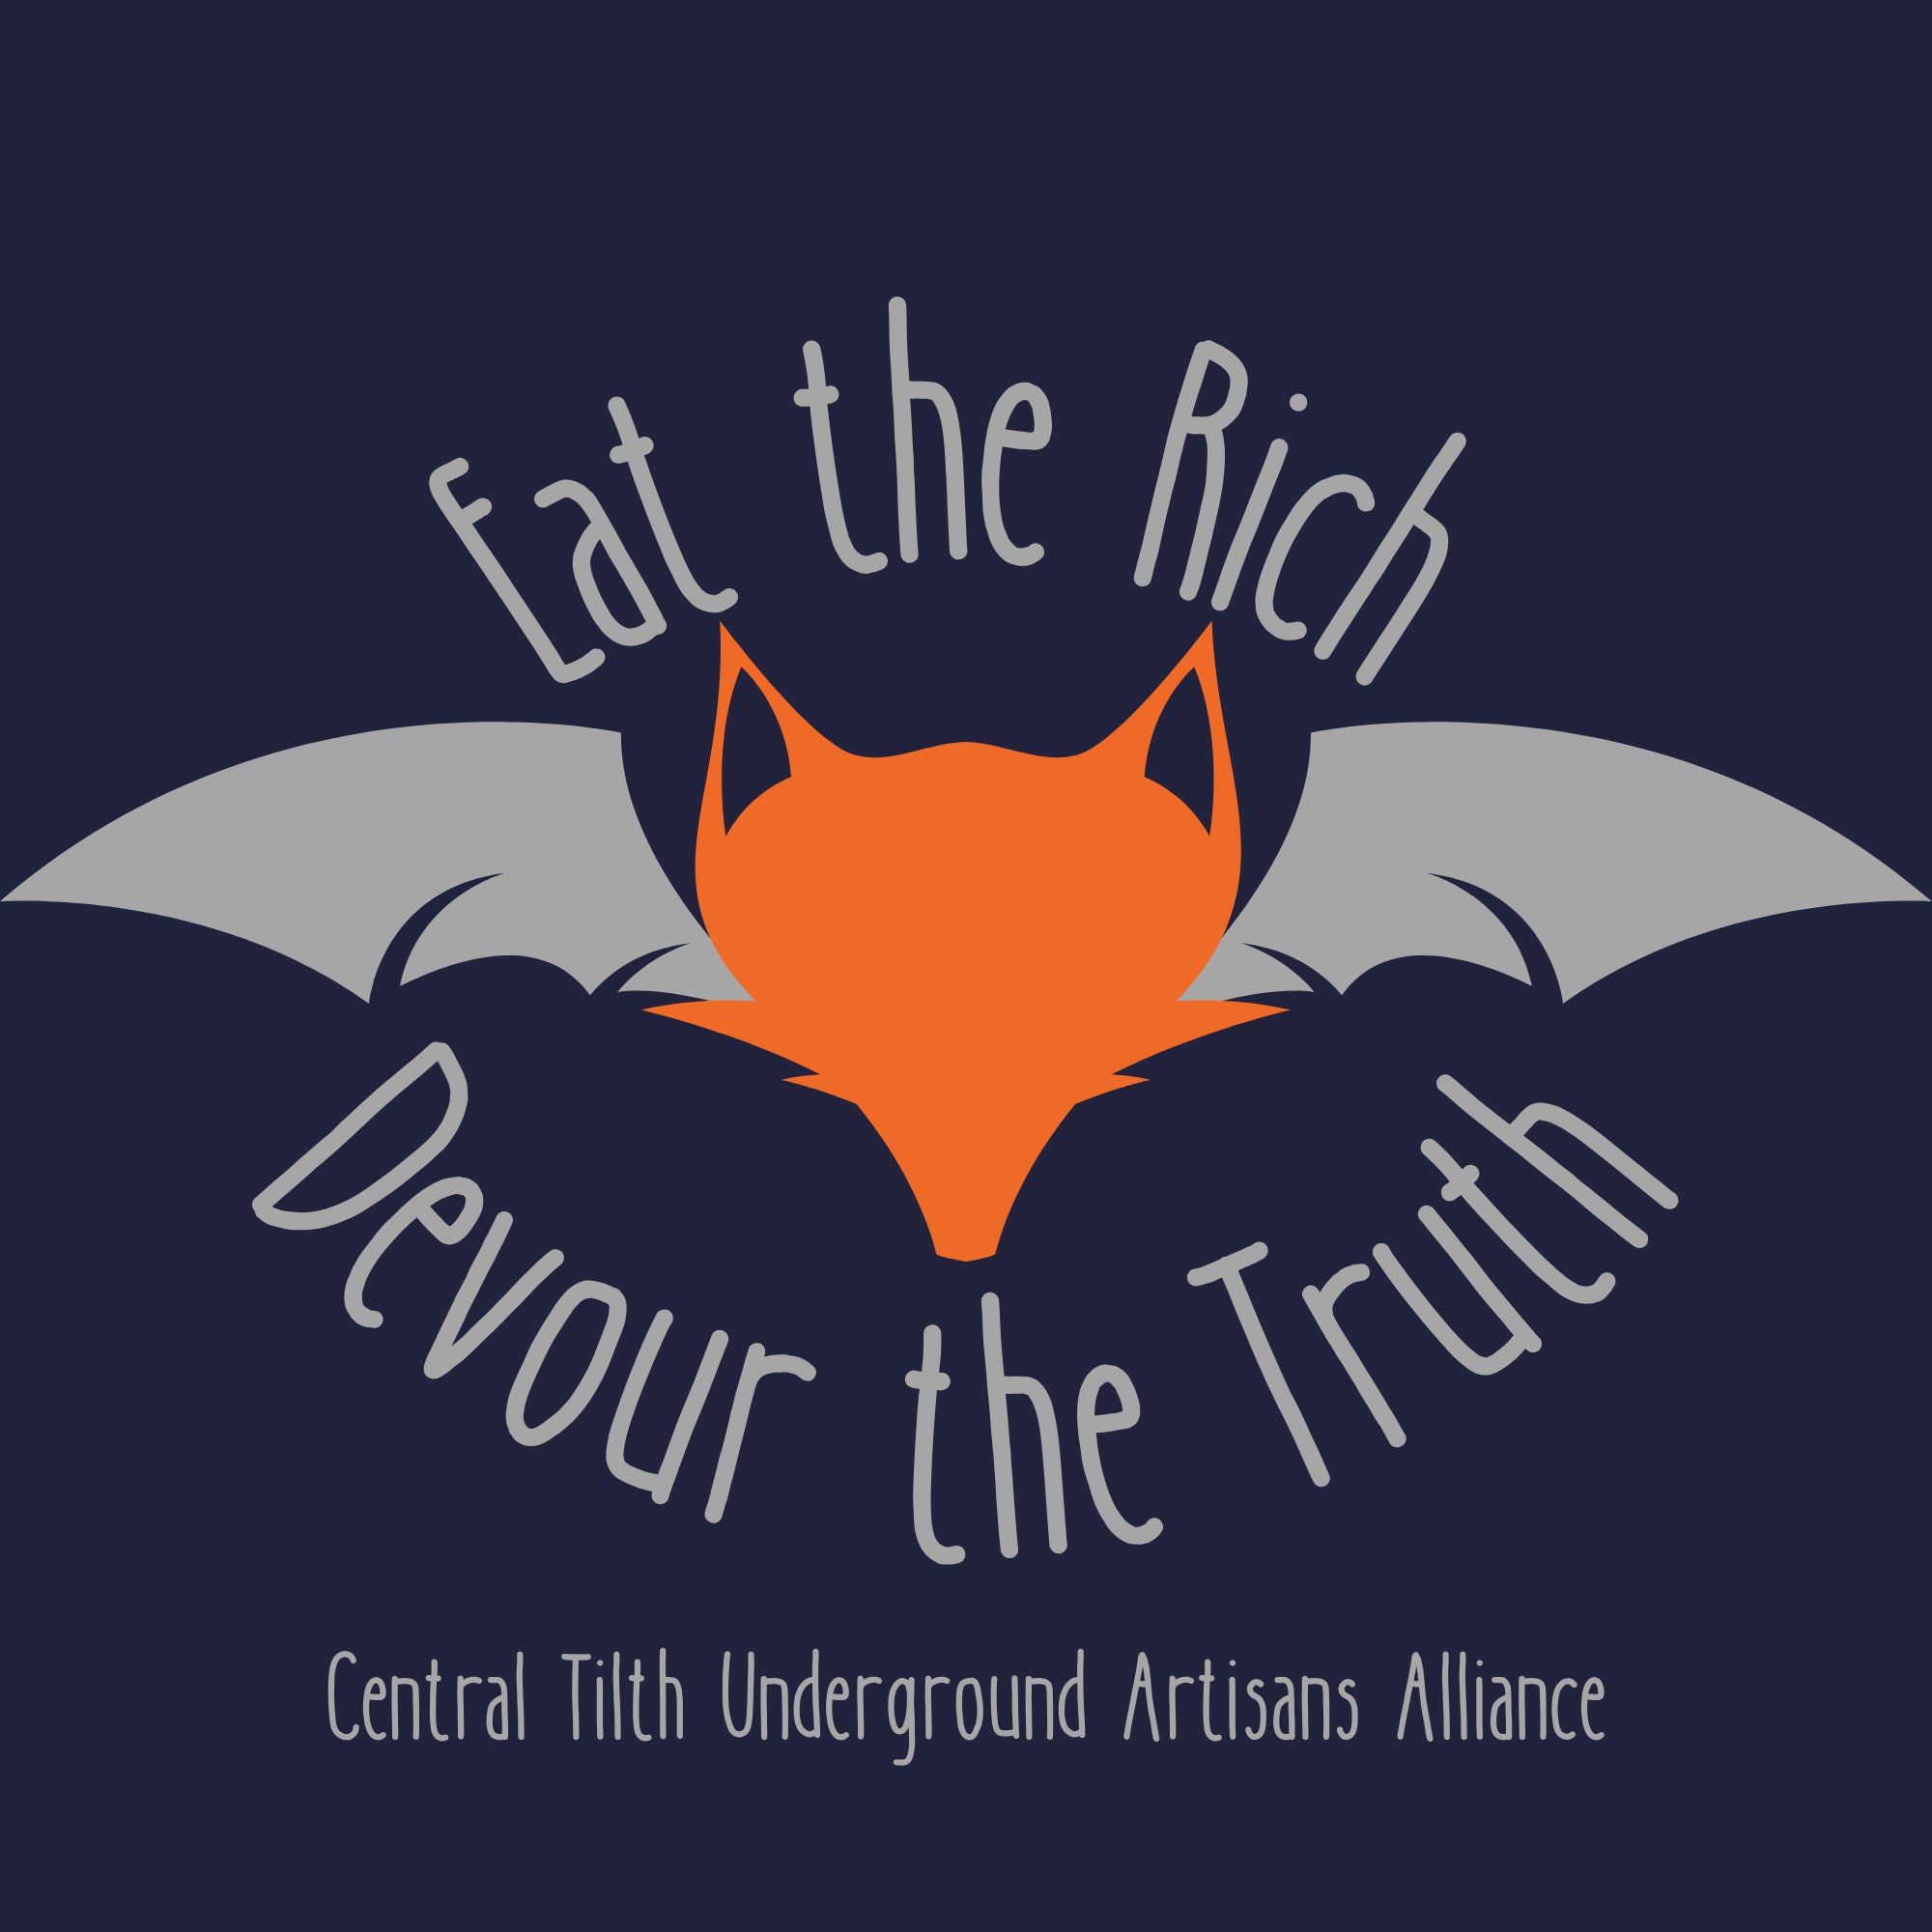 A stylized fox head with bat wings. Text reads "Eat the Rich Devour the Truth, Central Tilth Underground Artisans Alliance"